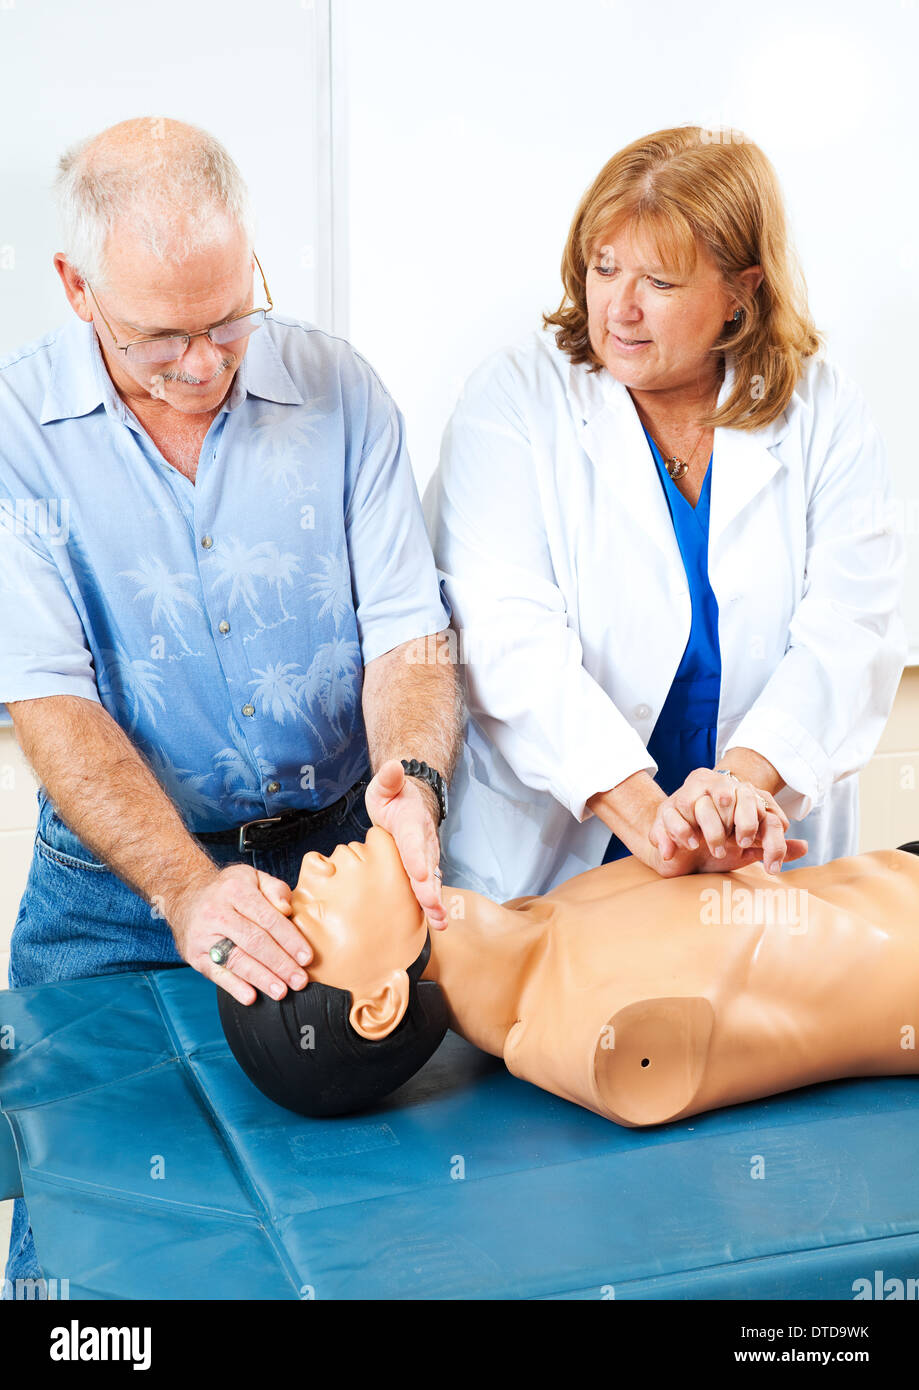 Doctor teaching first aid CPR to a mature adult student using a mannequin. Stock Photo